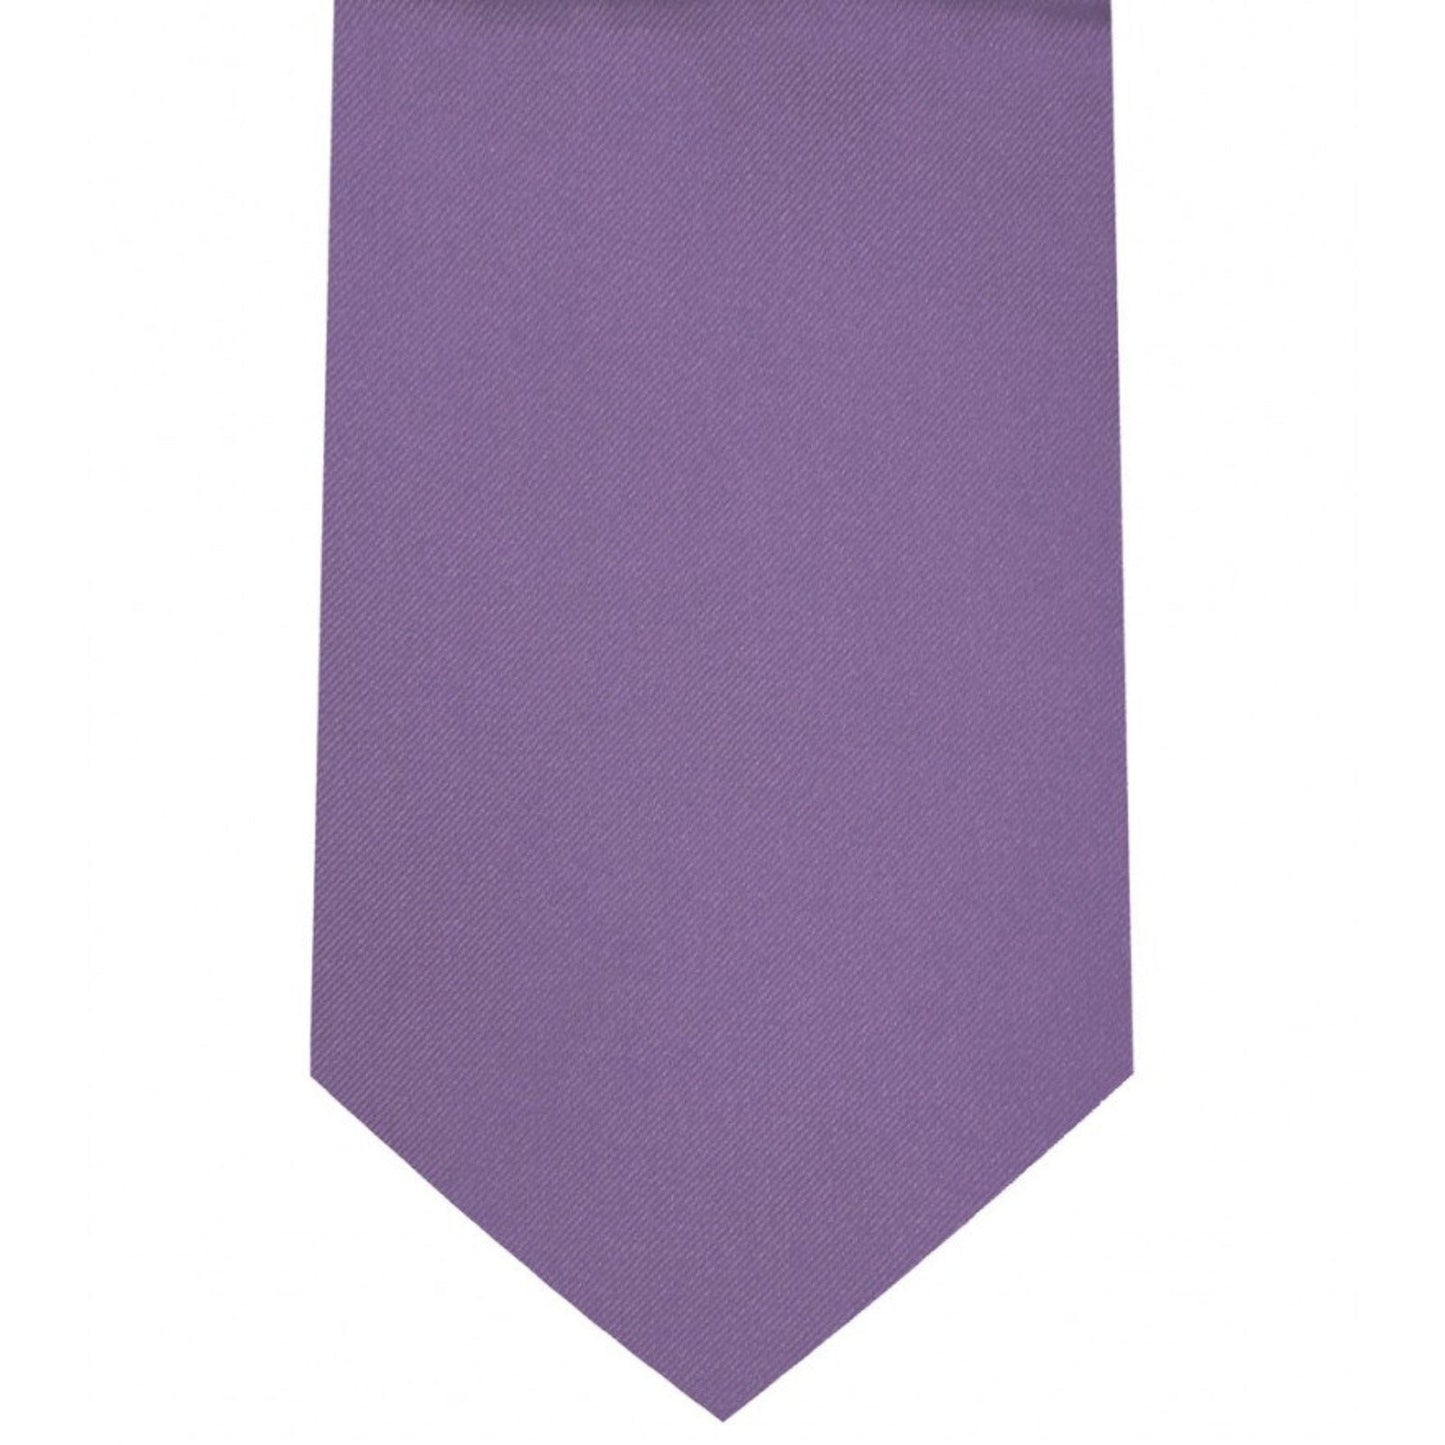 Classic Pastel Purple Tie Regular width 3.5 inches With Matching Pocket Square | KCT Menswear